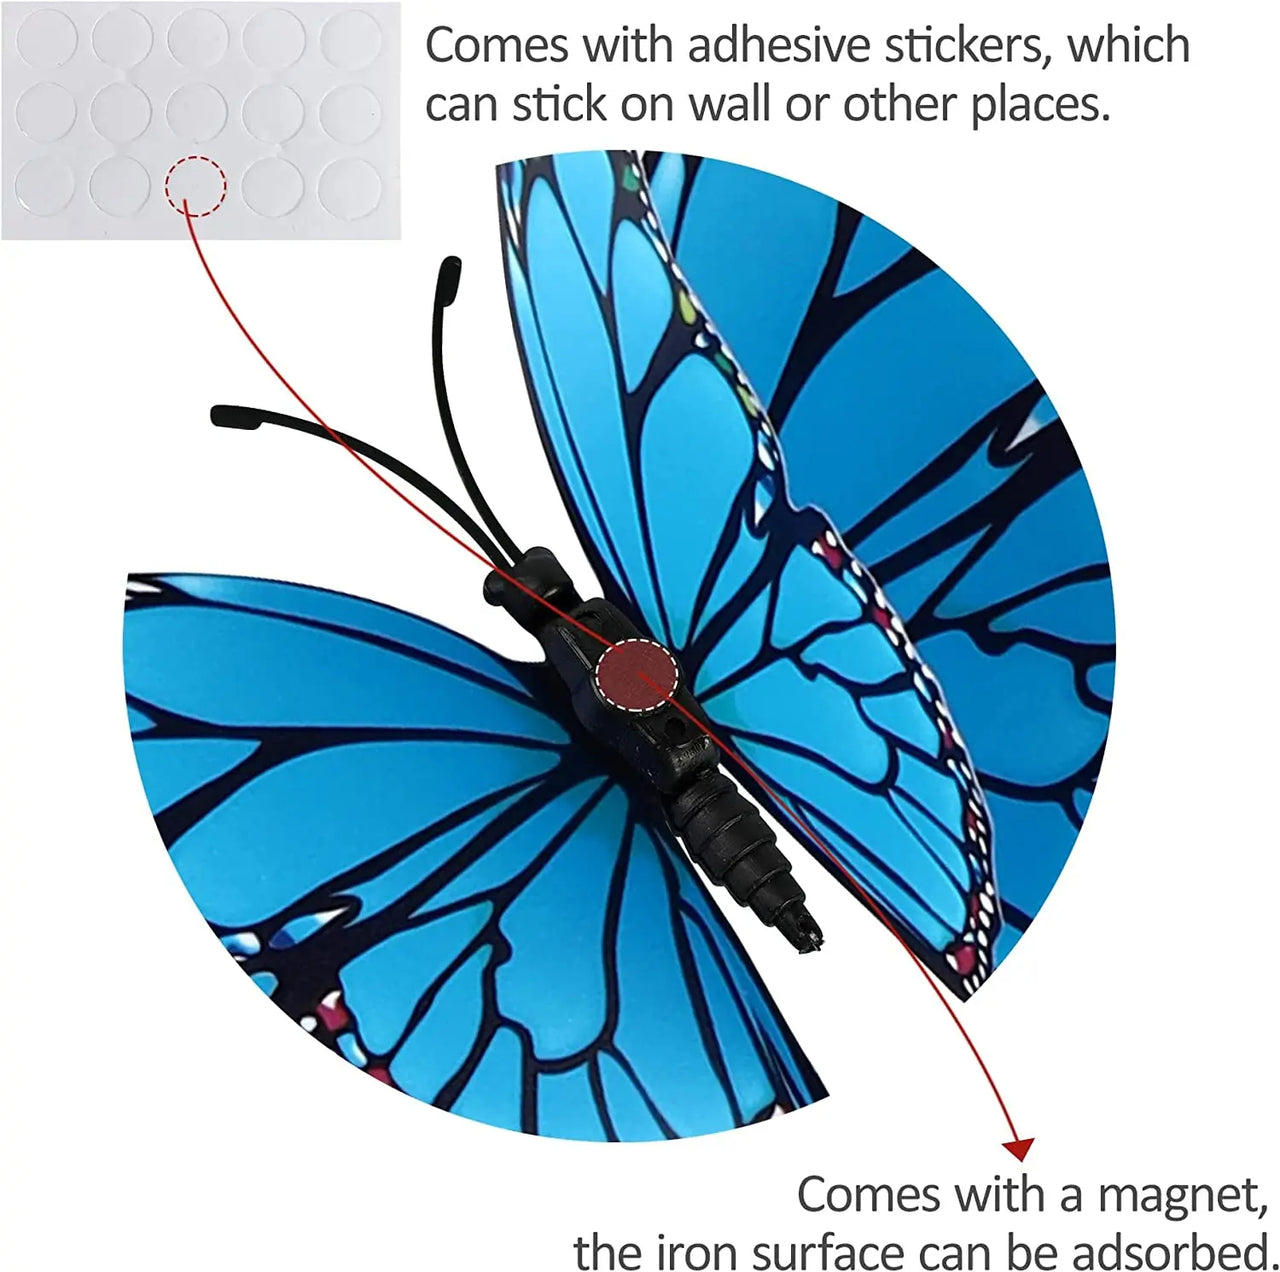 DIY Magnetic 3D Butterfly Stickers (10pcs)